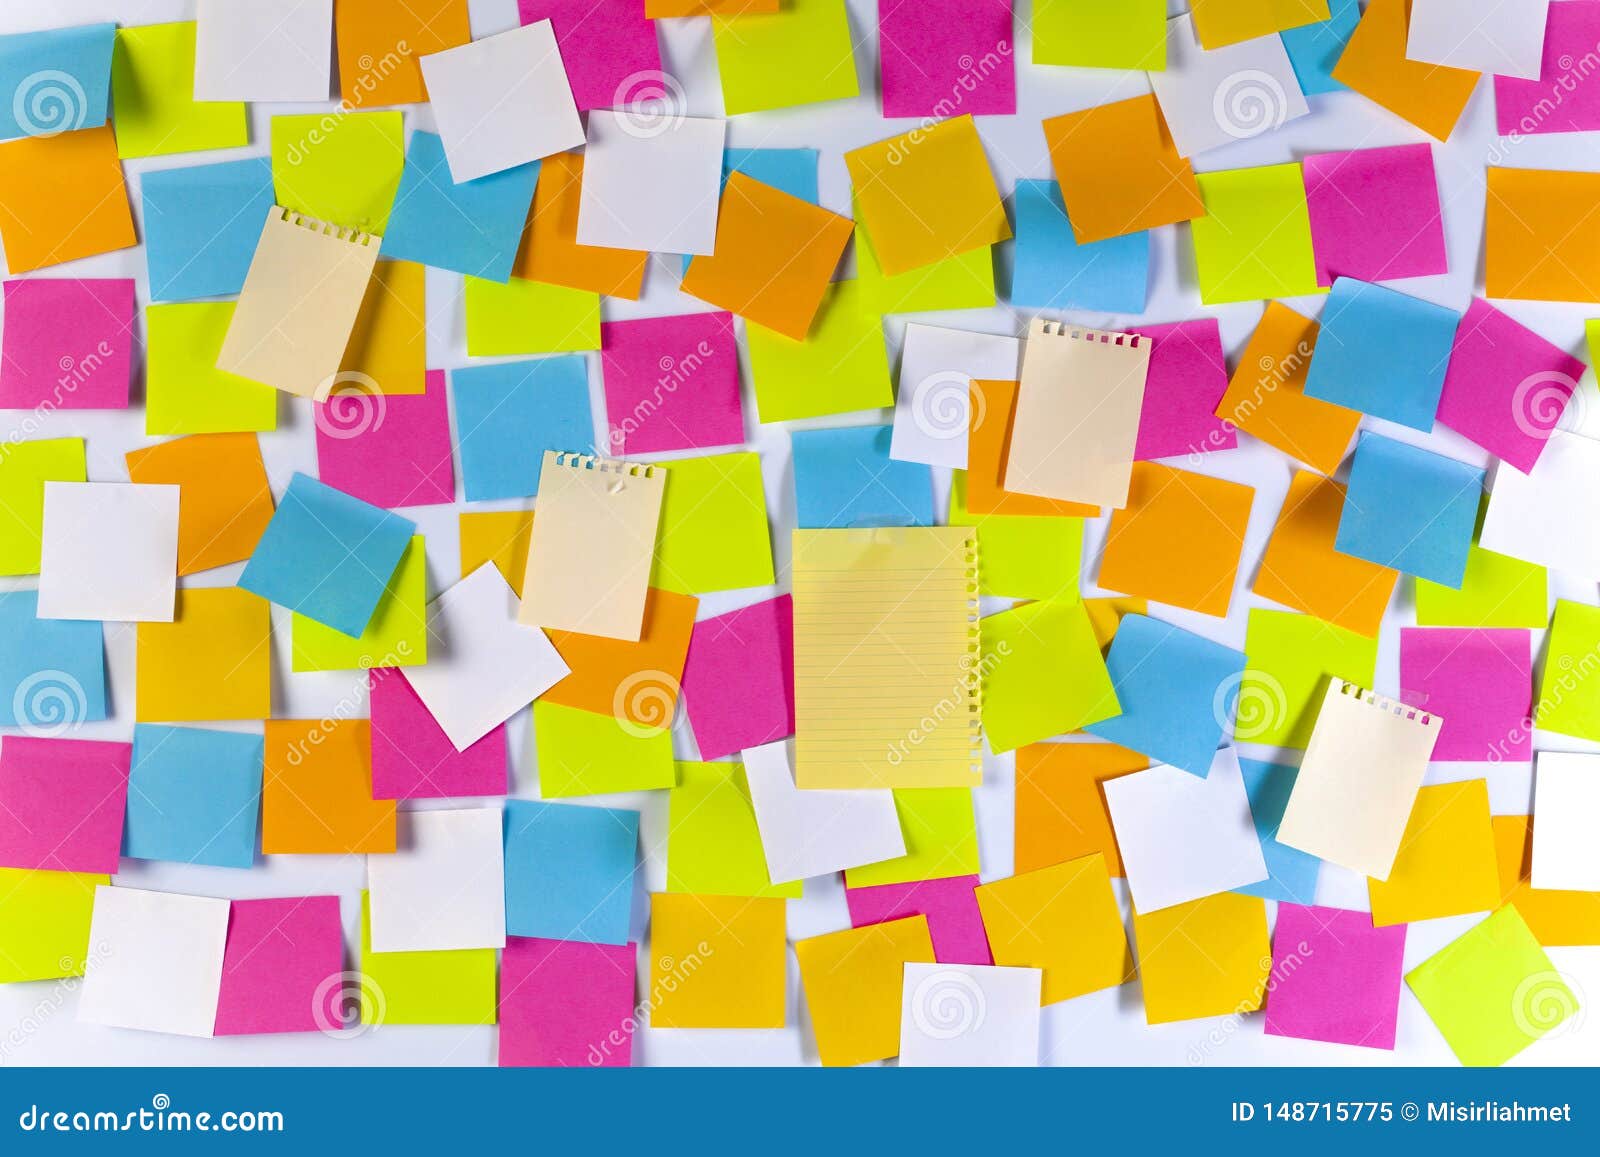 Sticky Note Post it Board Office Stock Image - Image of post